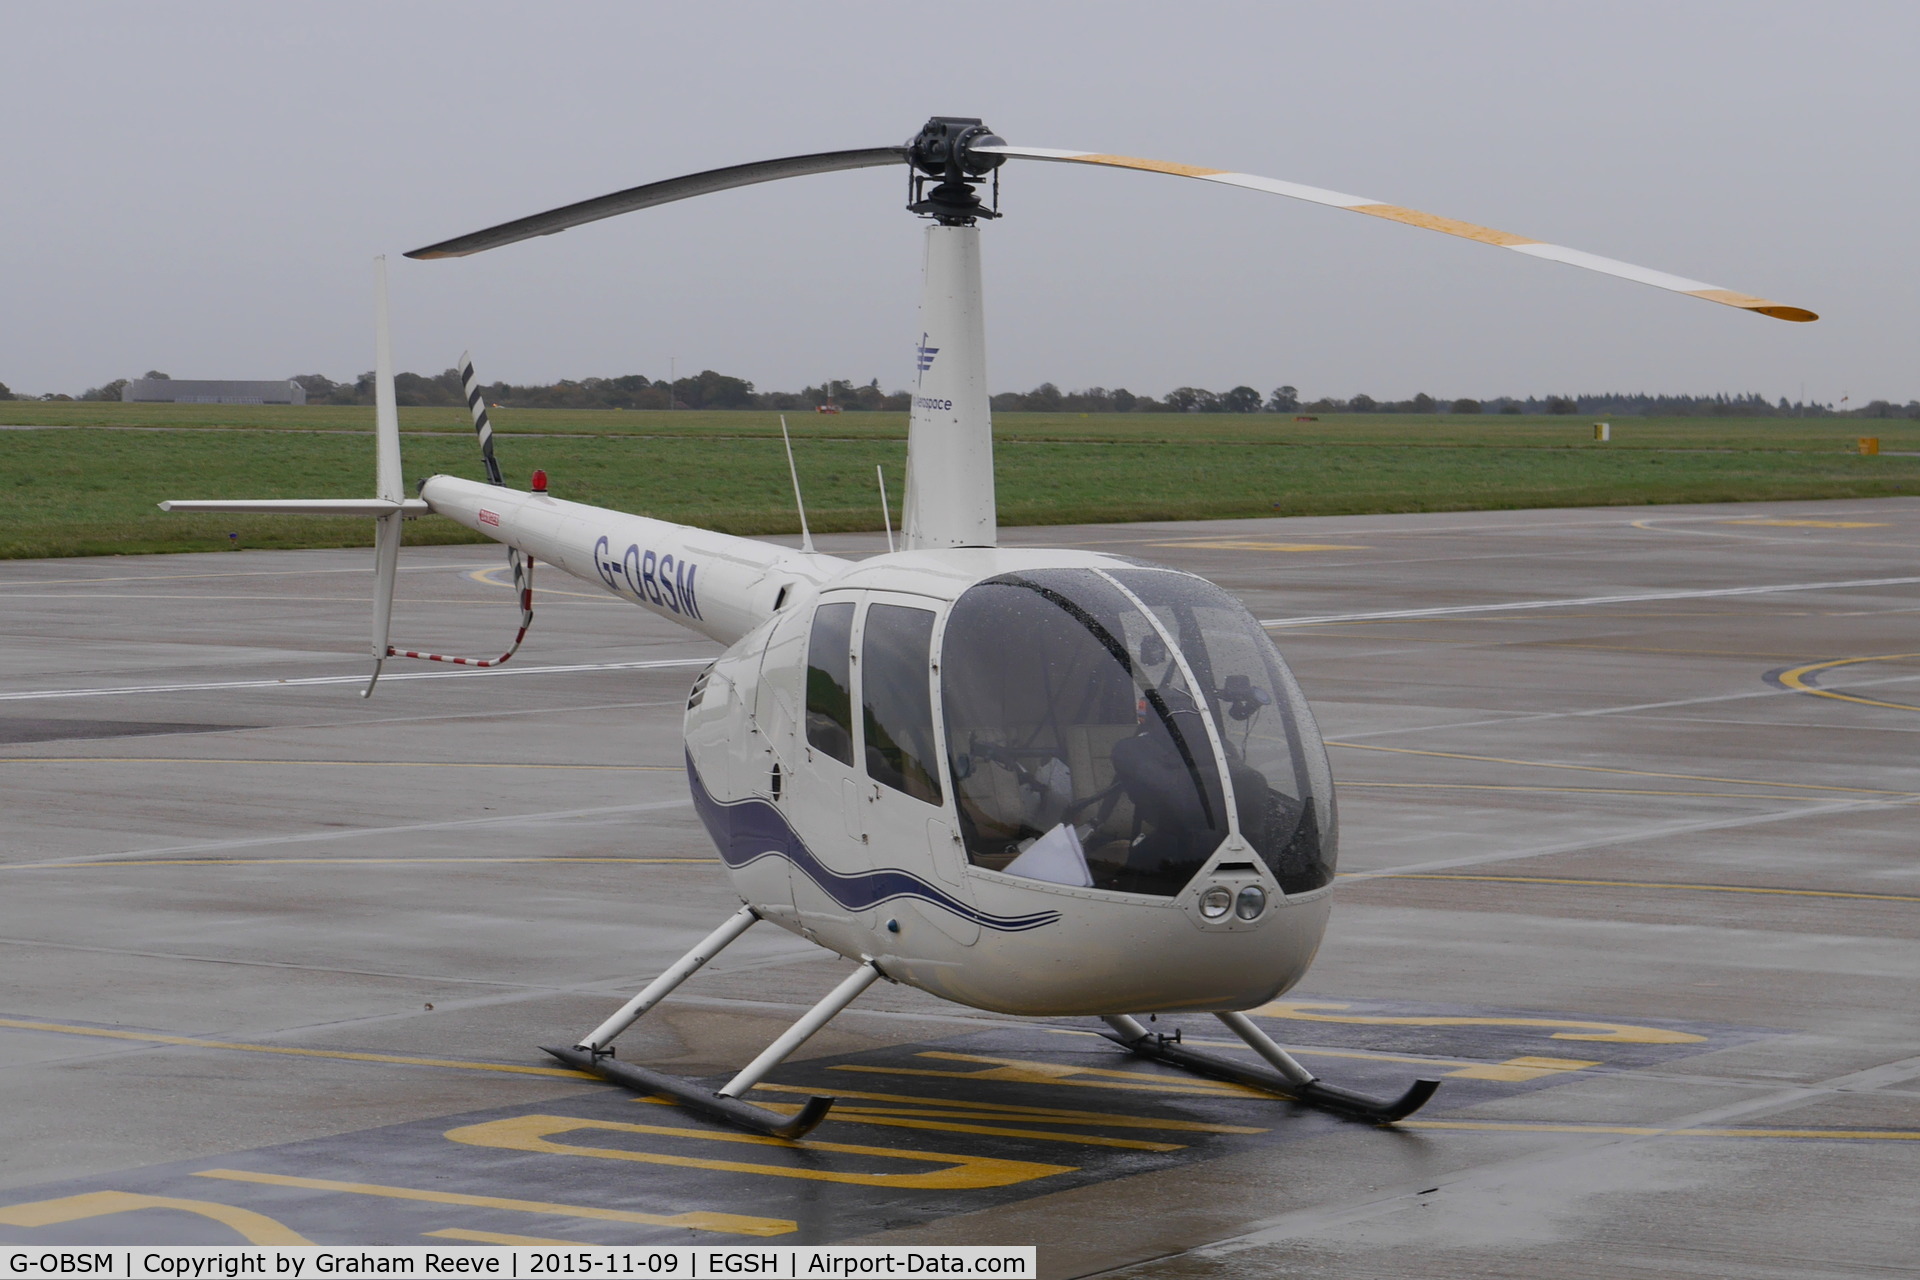 G-OBSM, 2001 Robinson R44 Raven C/N 1030, Parked at Norwich.